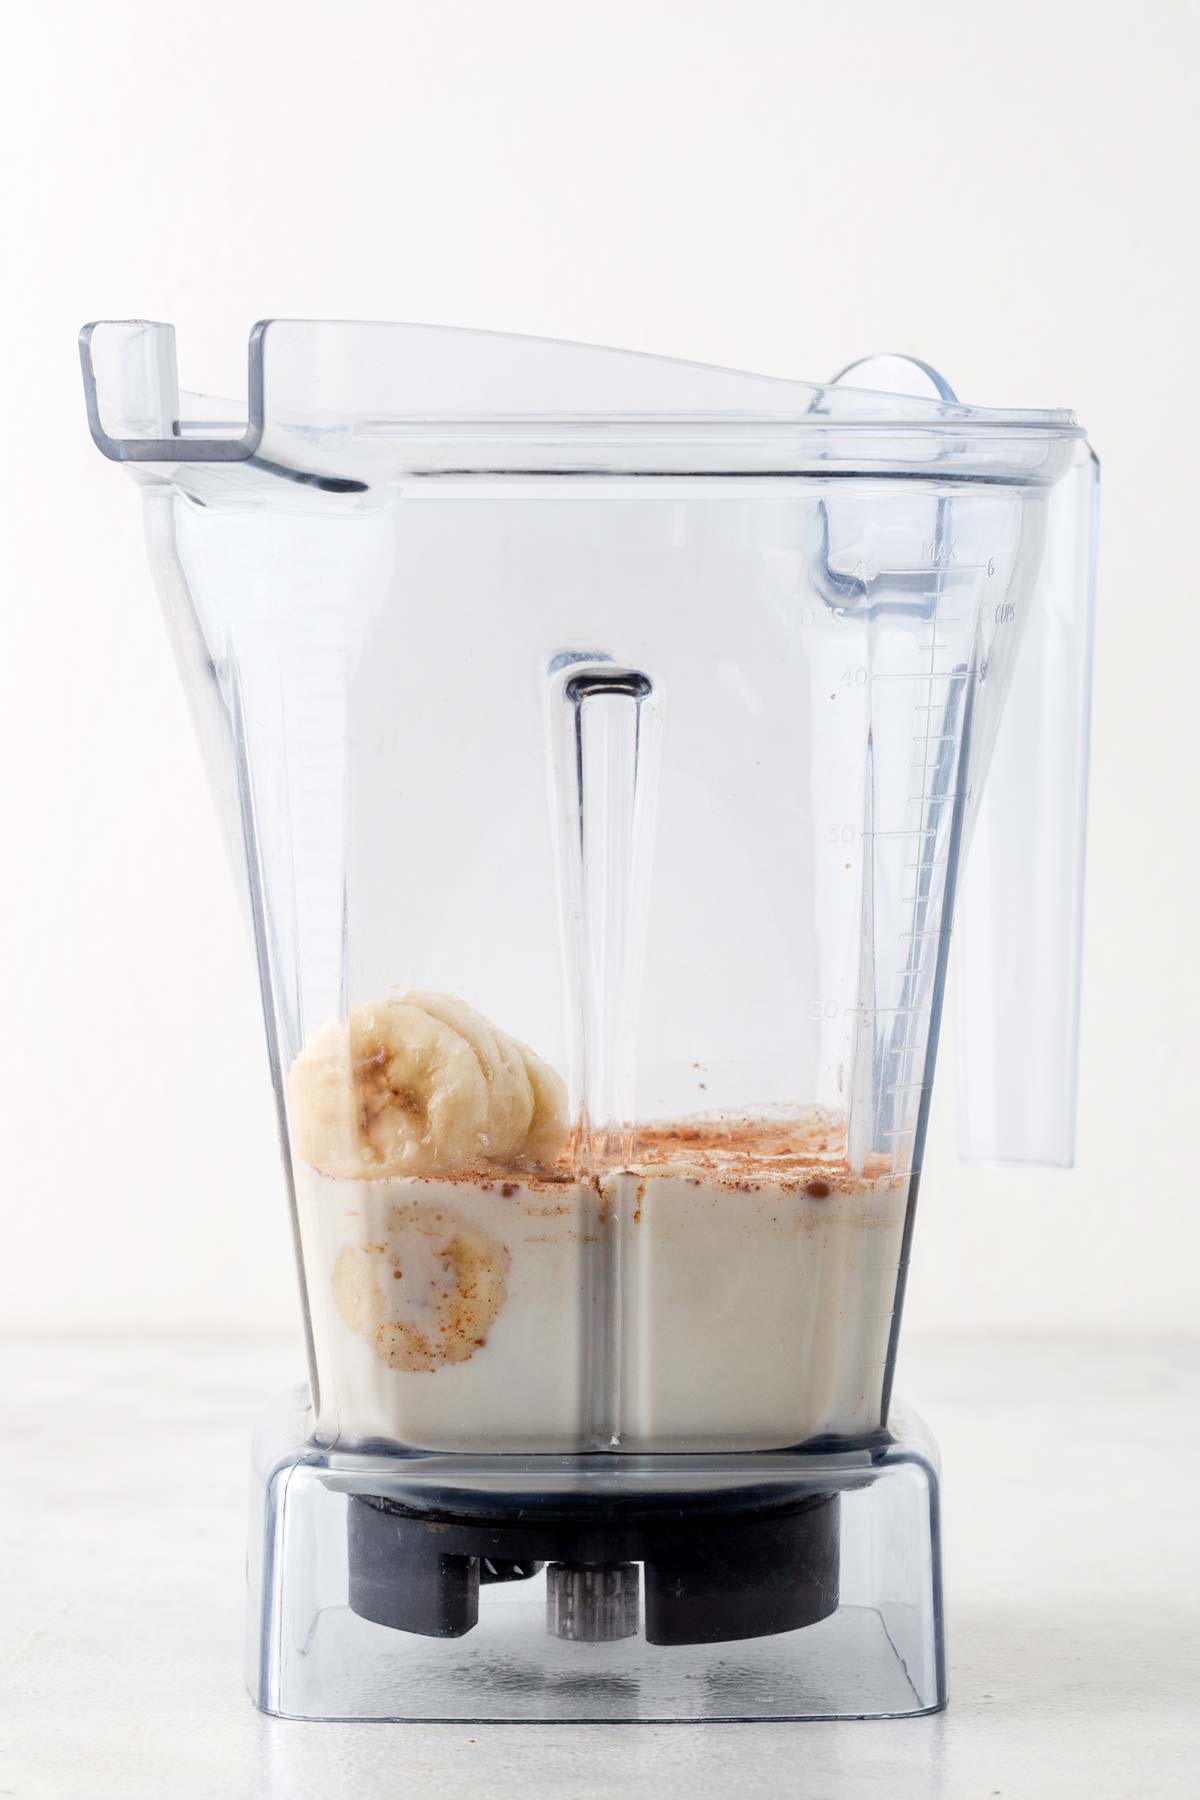 Ingredients for peanut butter smoothie in a blender.